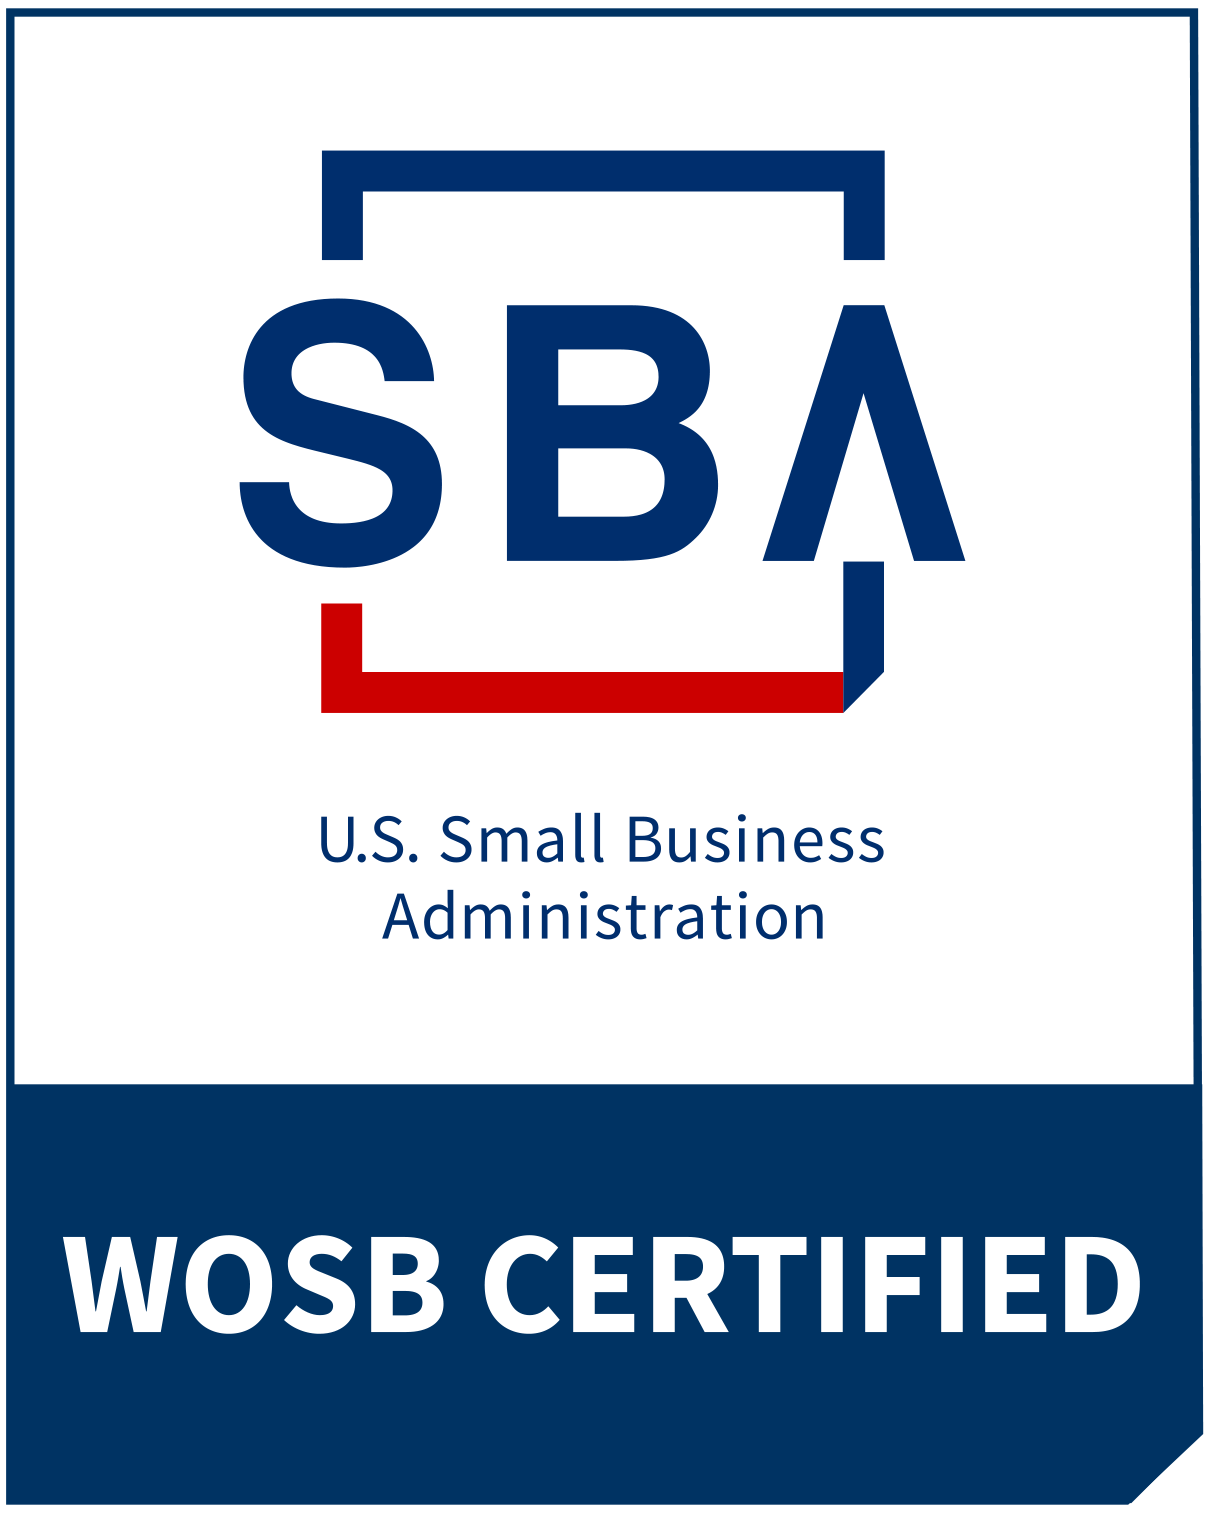 Women-Owned Small Business Certified